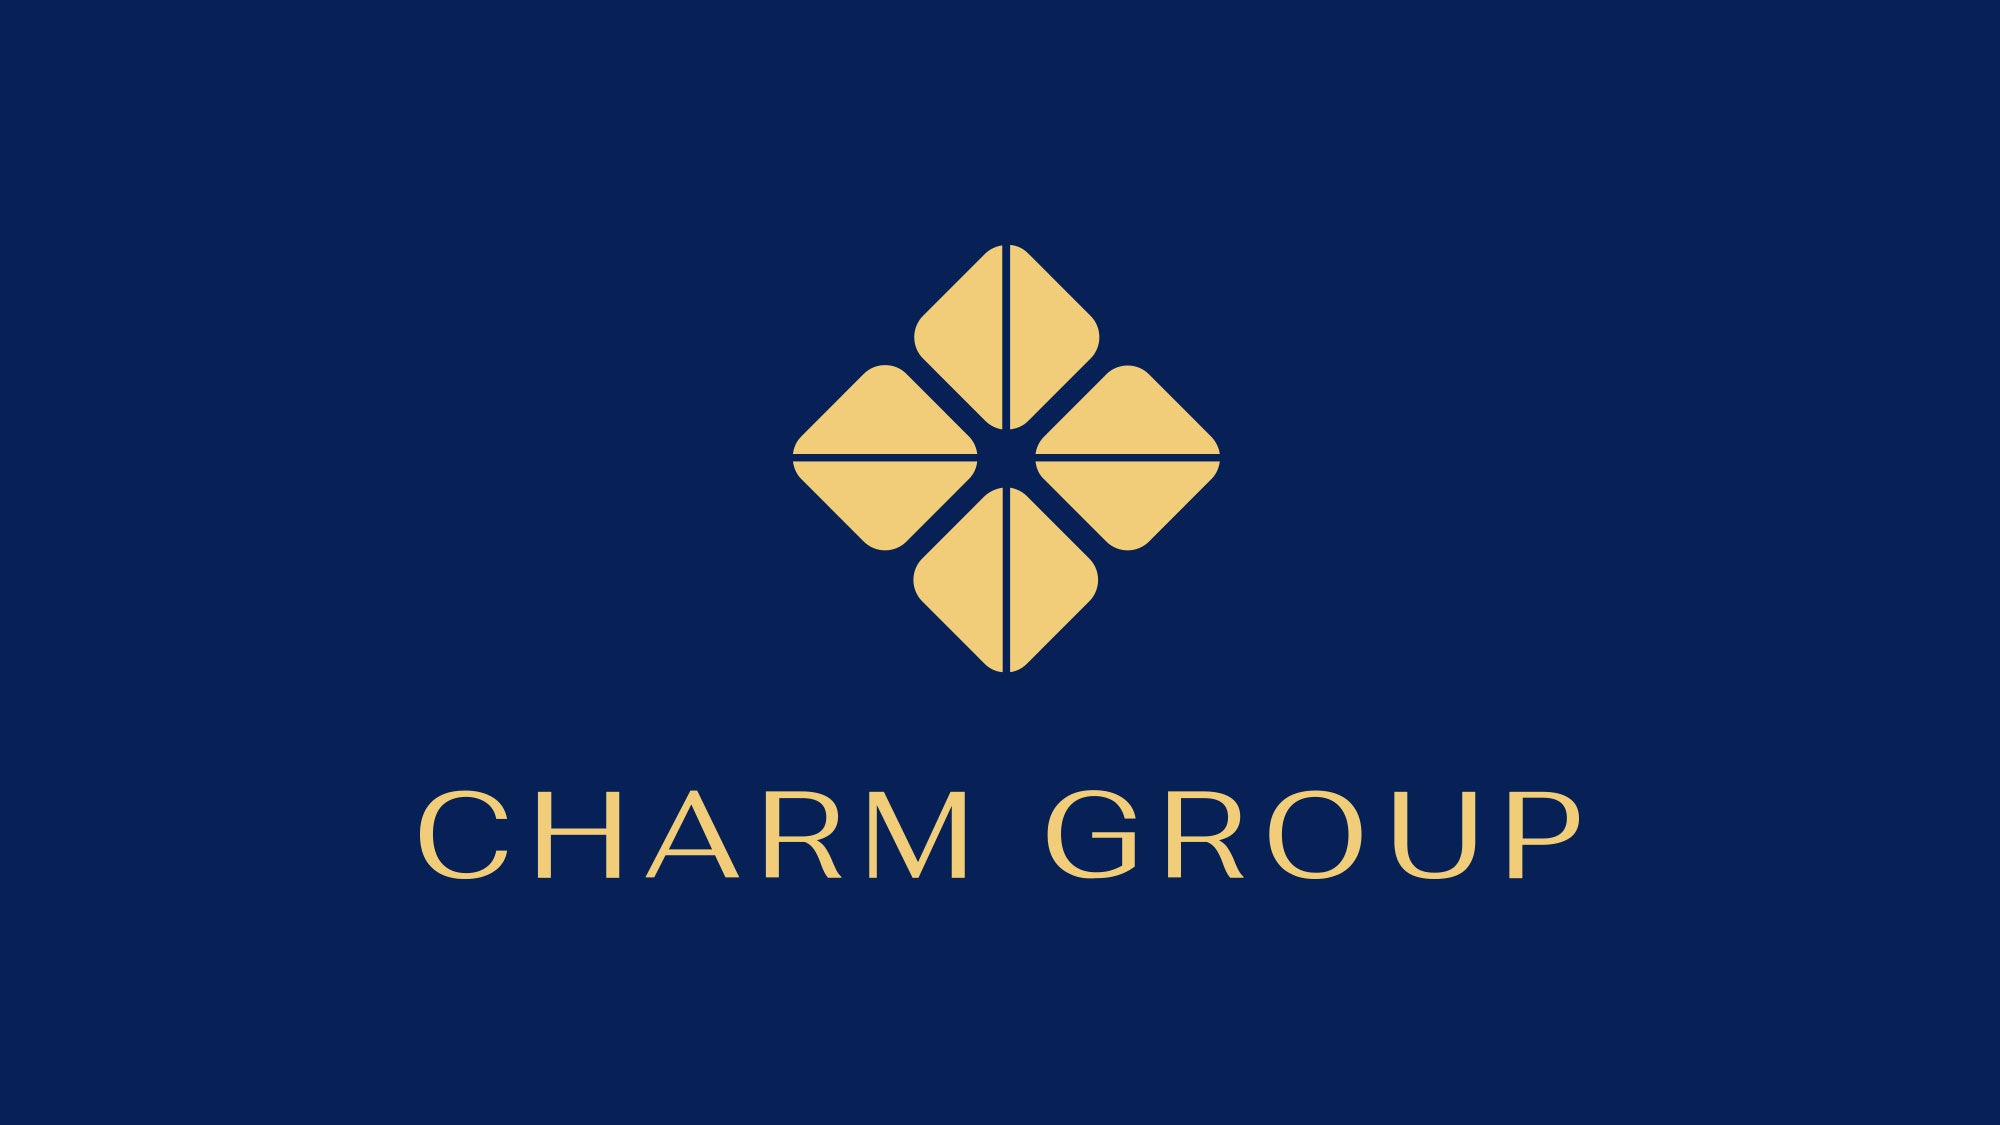 CHARM GROUP A JOURNEY OF CREATING ICONIC MASTERPIECES